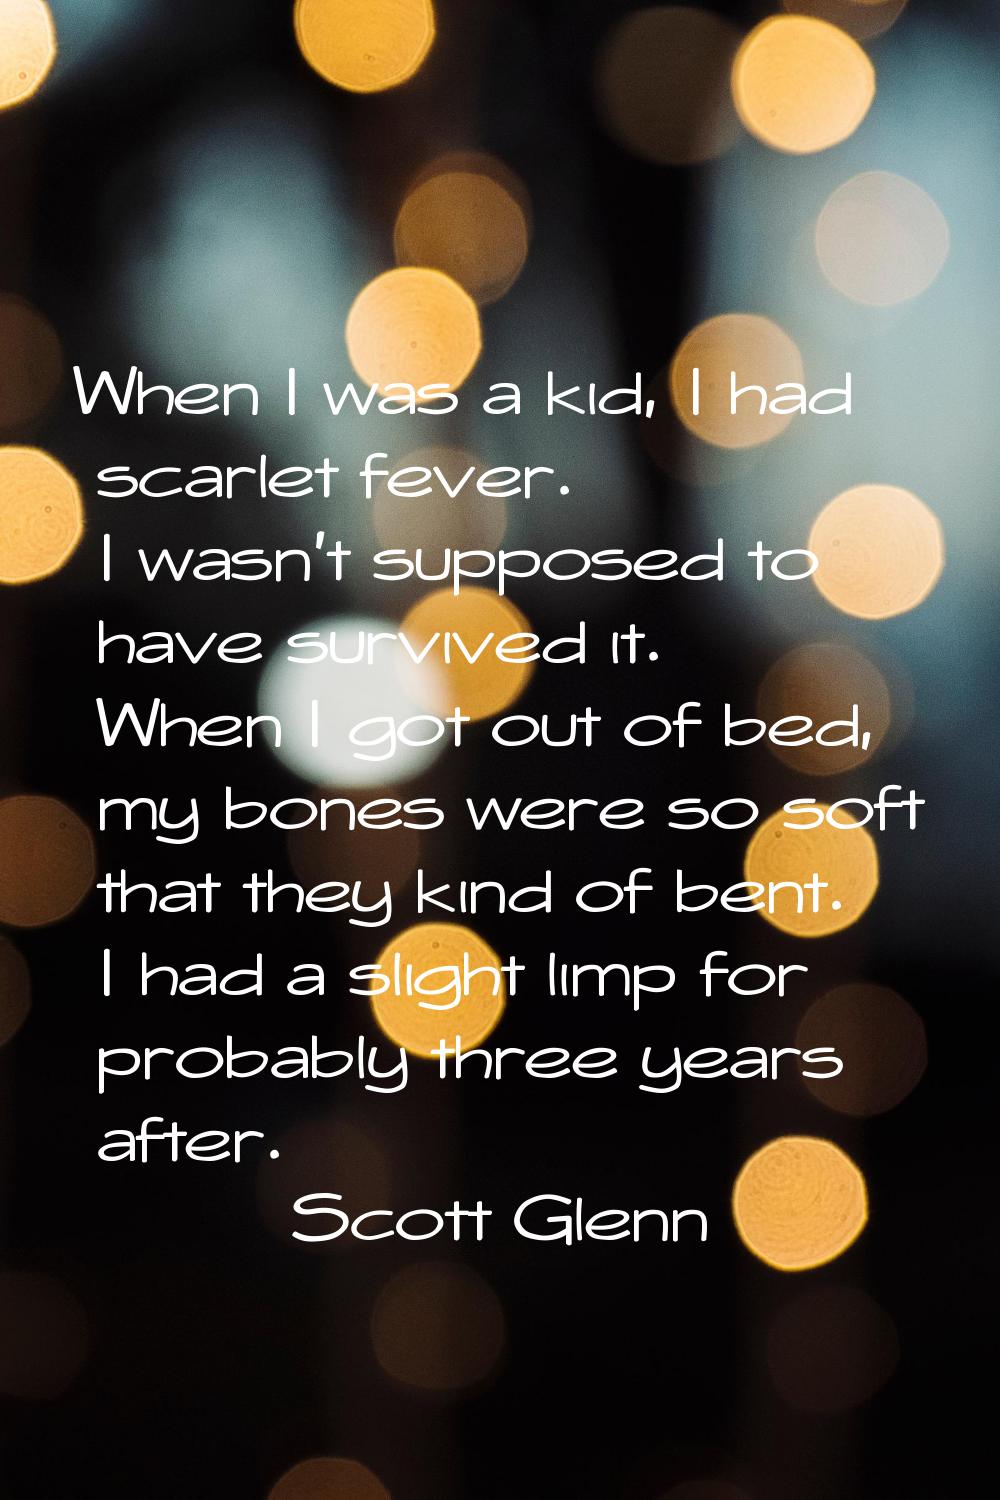 When I was a kid, I had scarlet fever. I wasn't supposed to have survived it. When I got out of bed